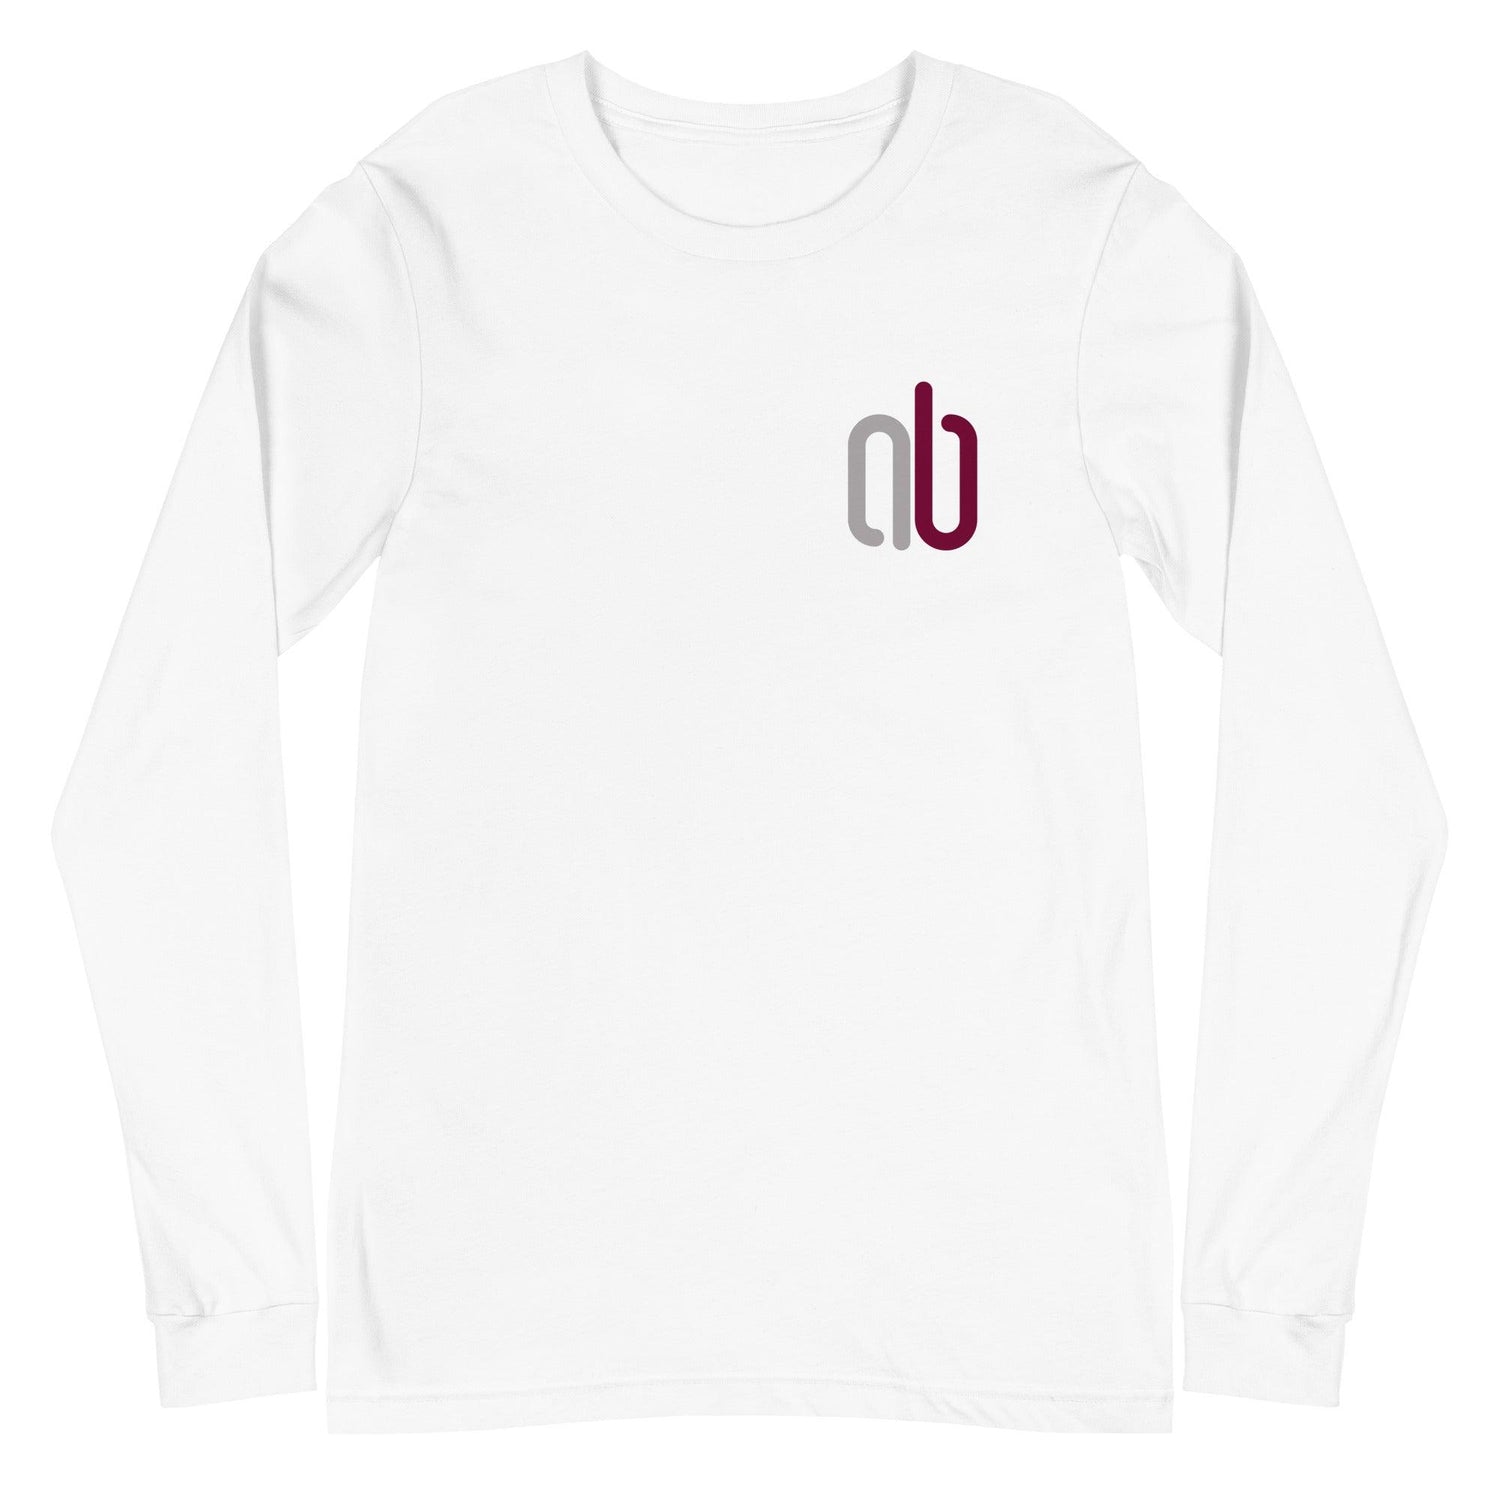 Andrew Body "Essentials" Long Sleeve Tee - Fan Arch